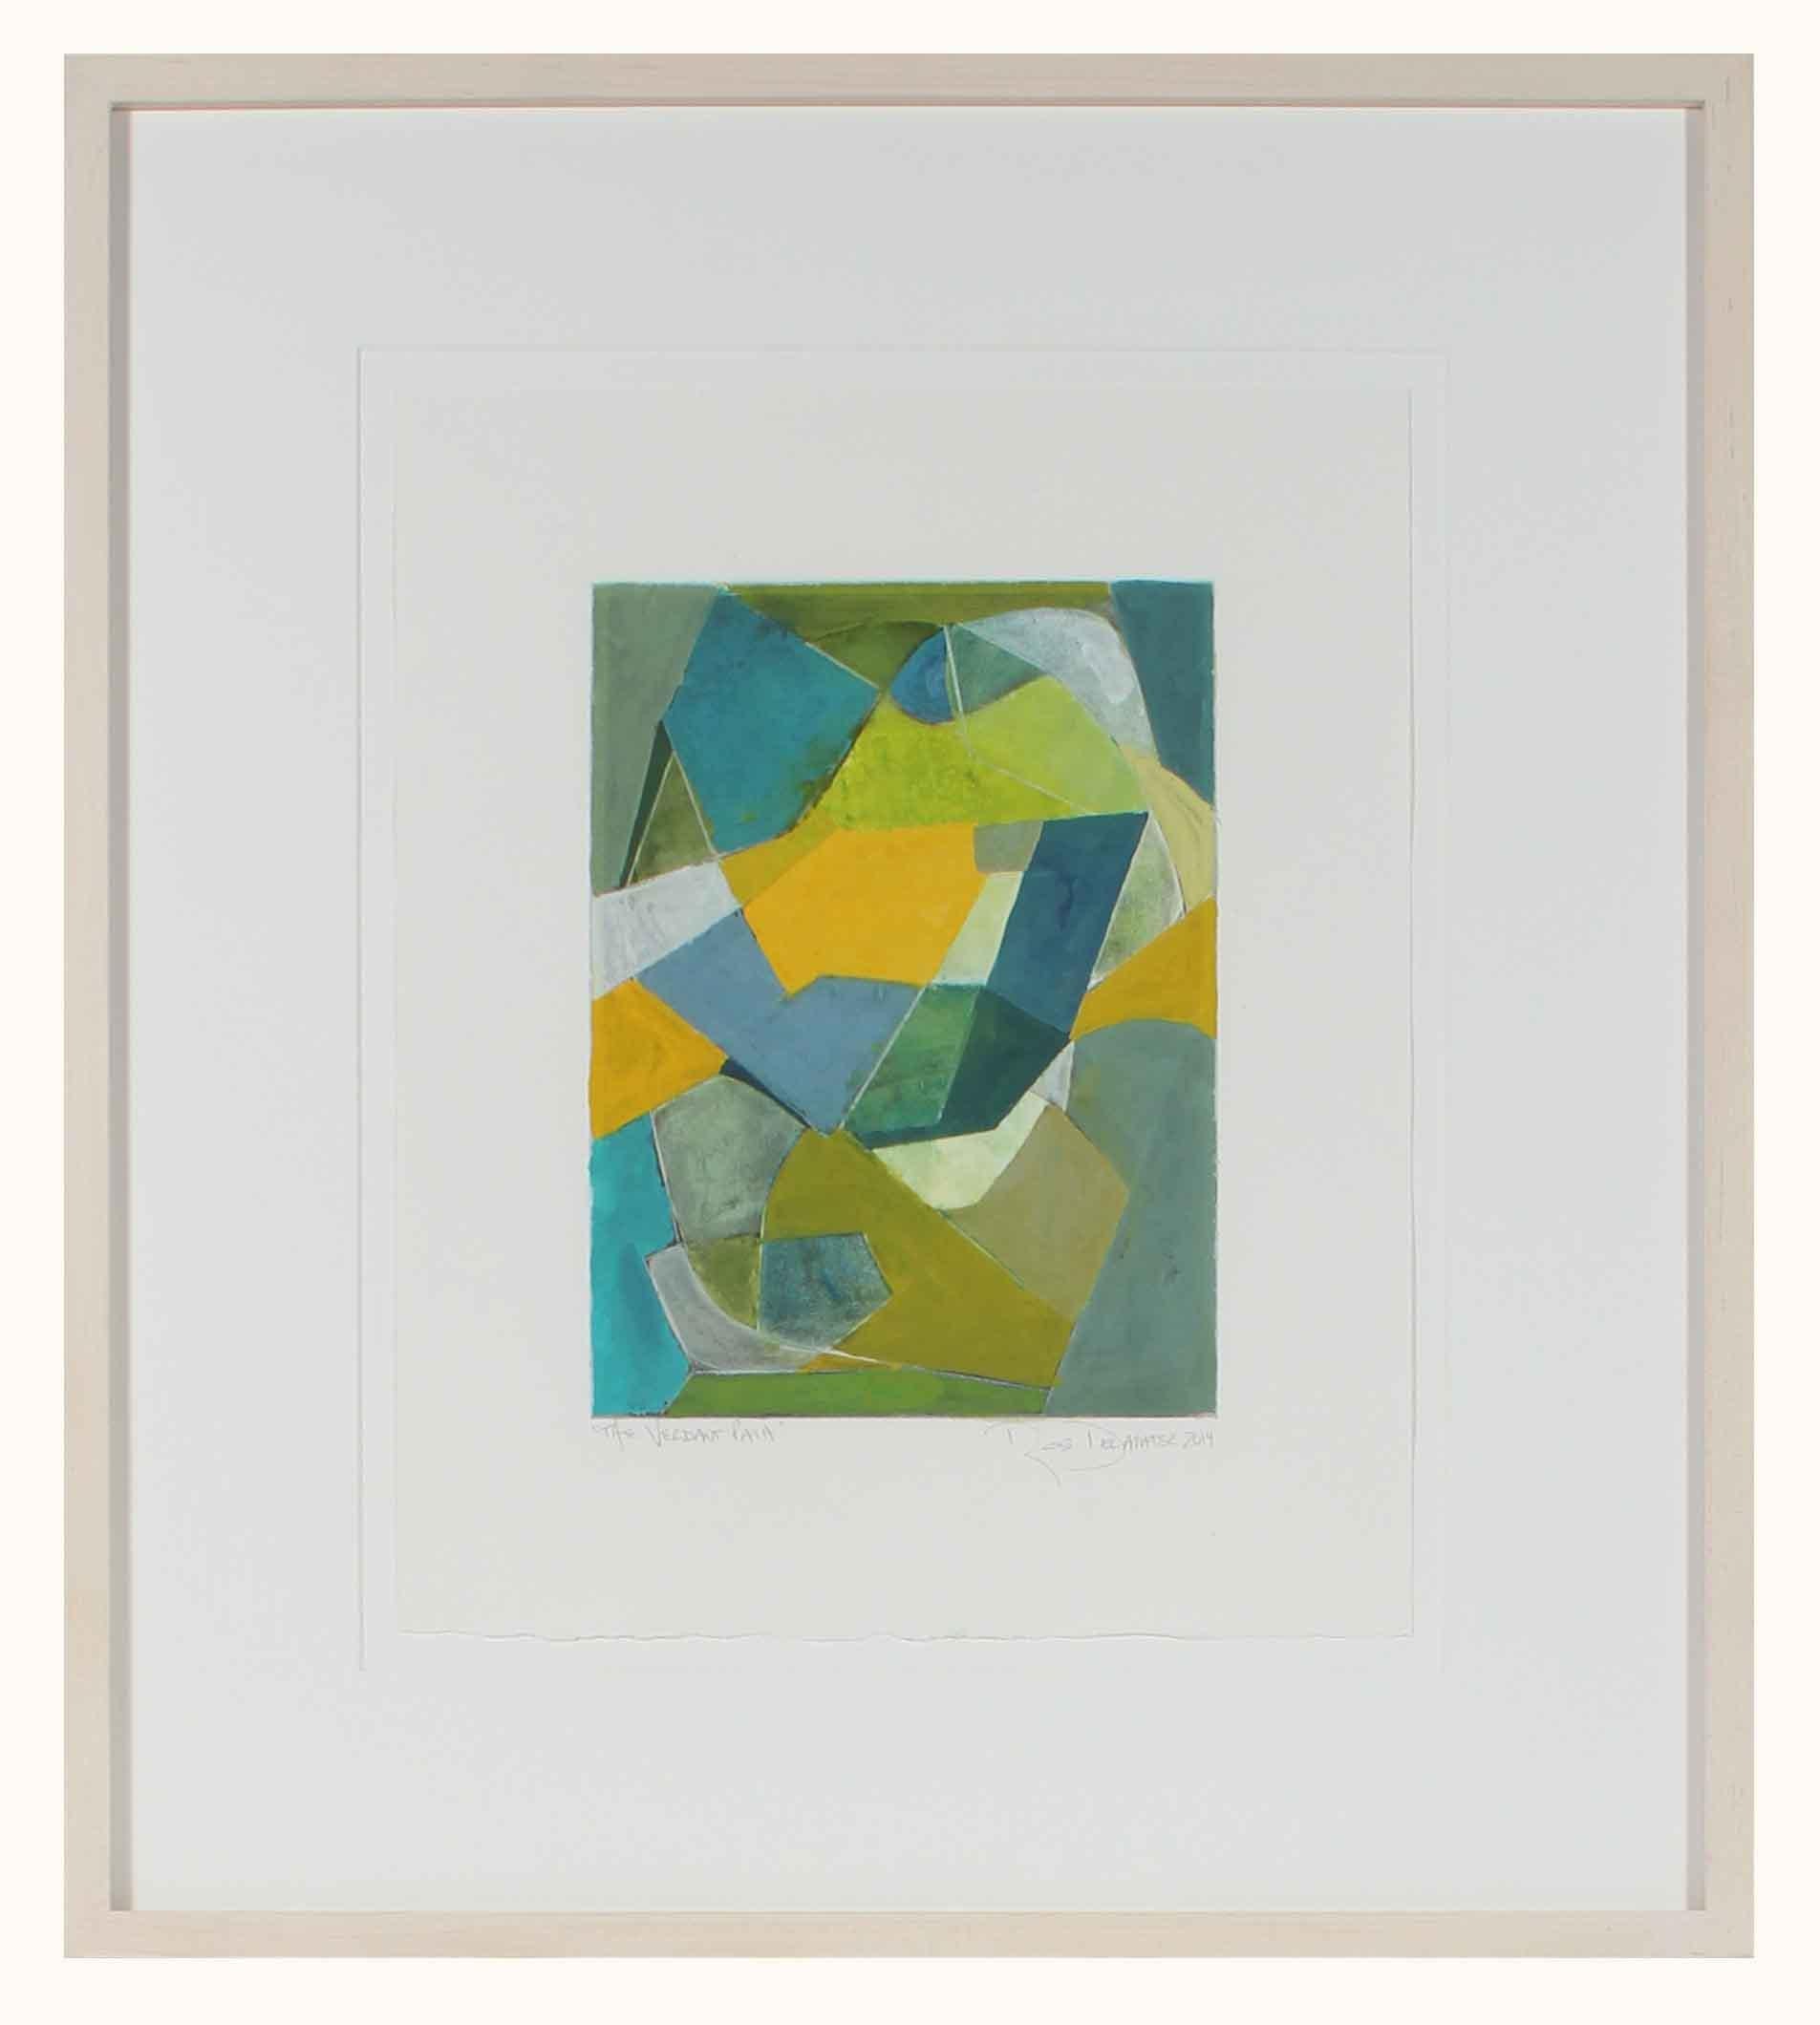 Rob Delamater Abstract Painting - "The Verdant Path" Ink & Gouache Abstract, 2014